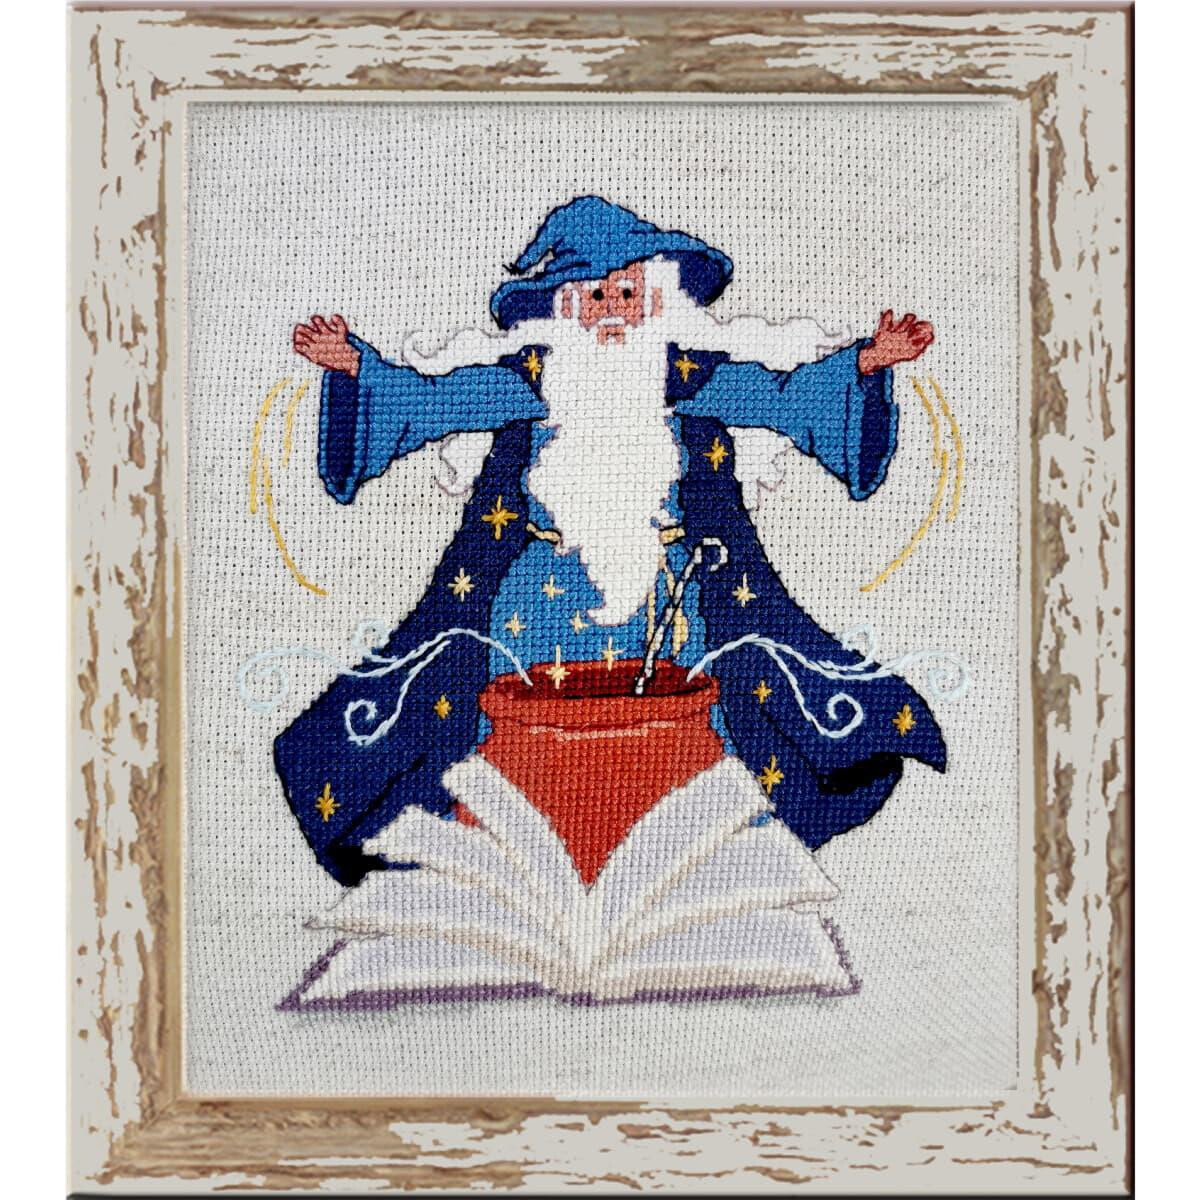 Nimue Cross Stitch counted Chart "Merlin...